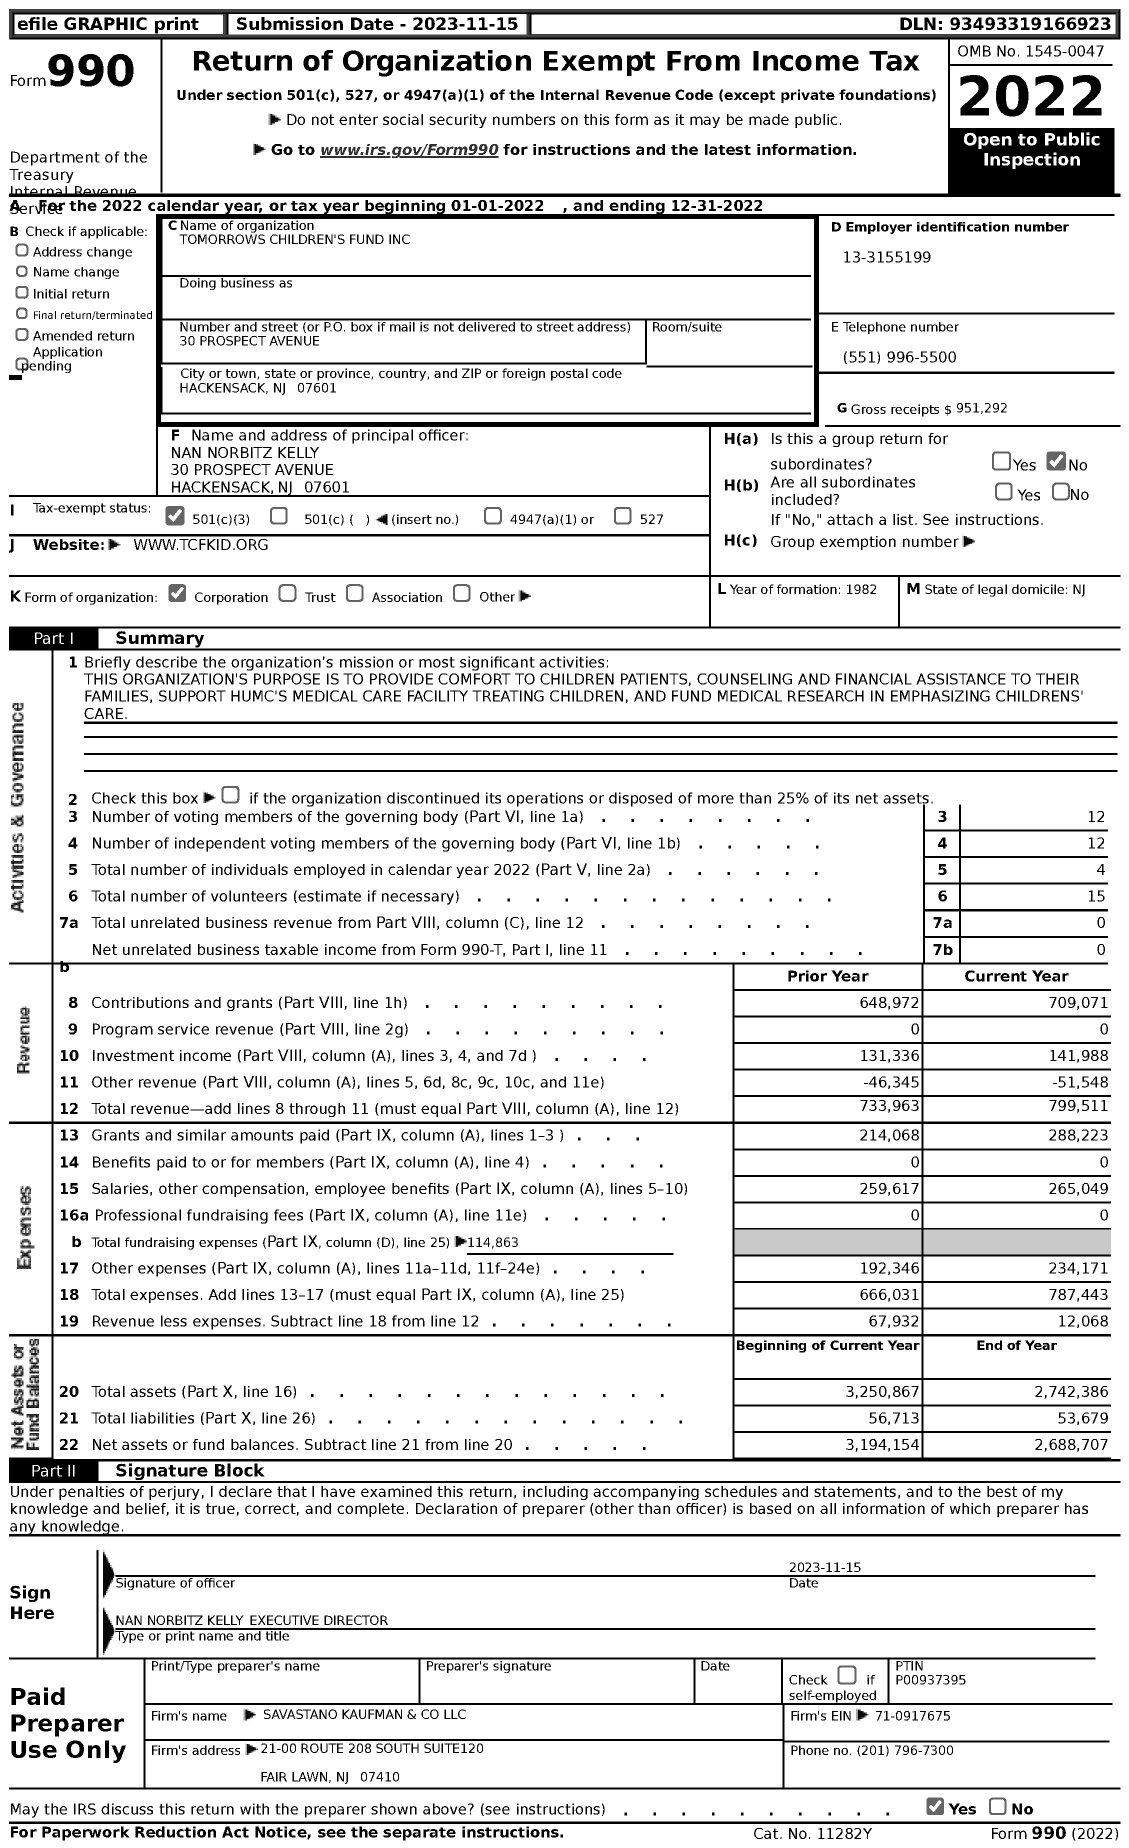 Image of first page of 2022 Form 990 for Tomorrows Children's Fund (TCF)